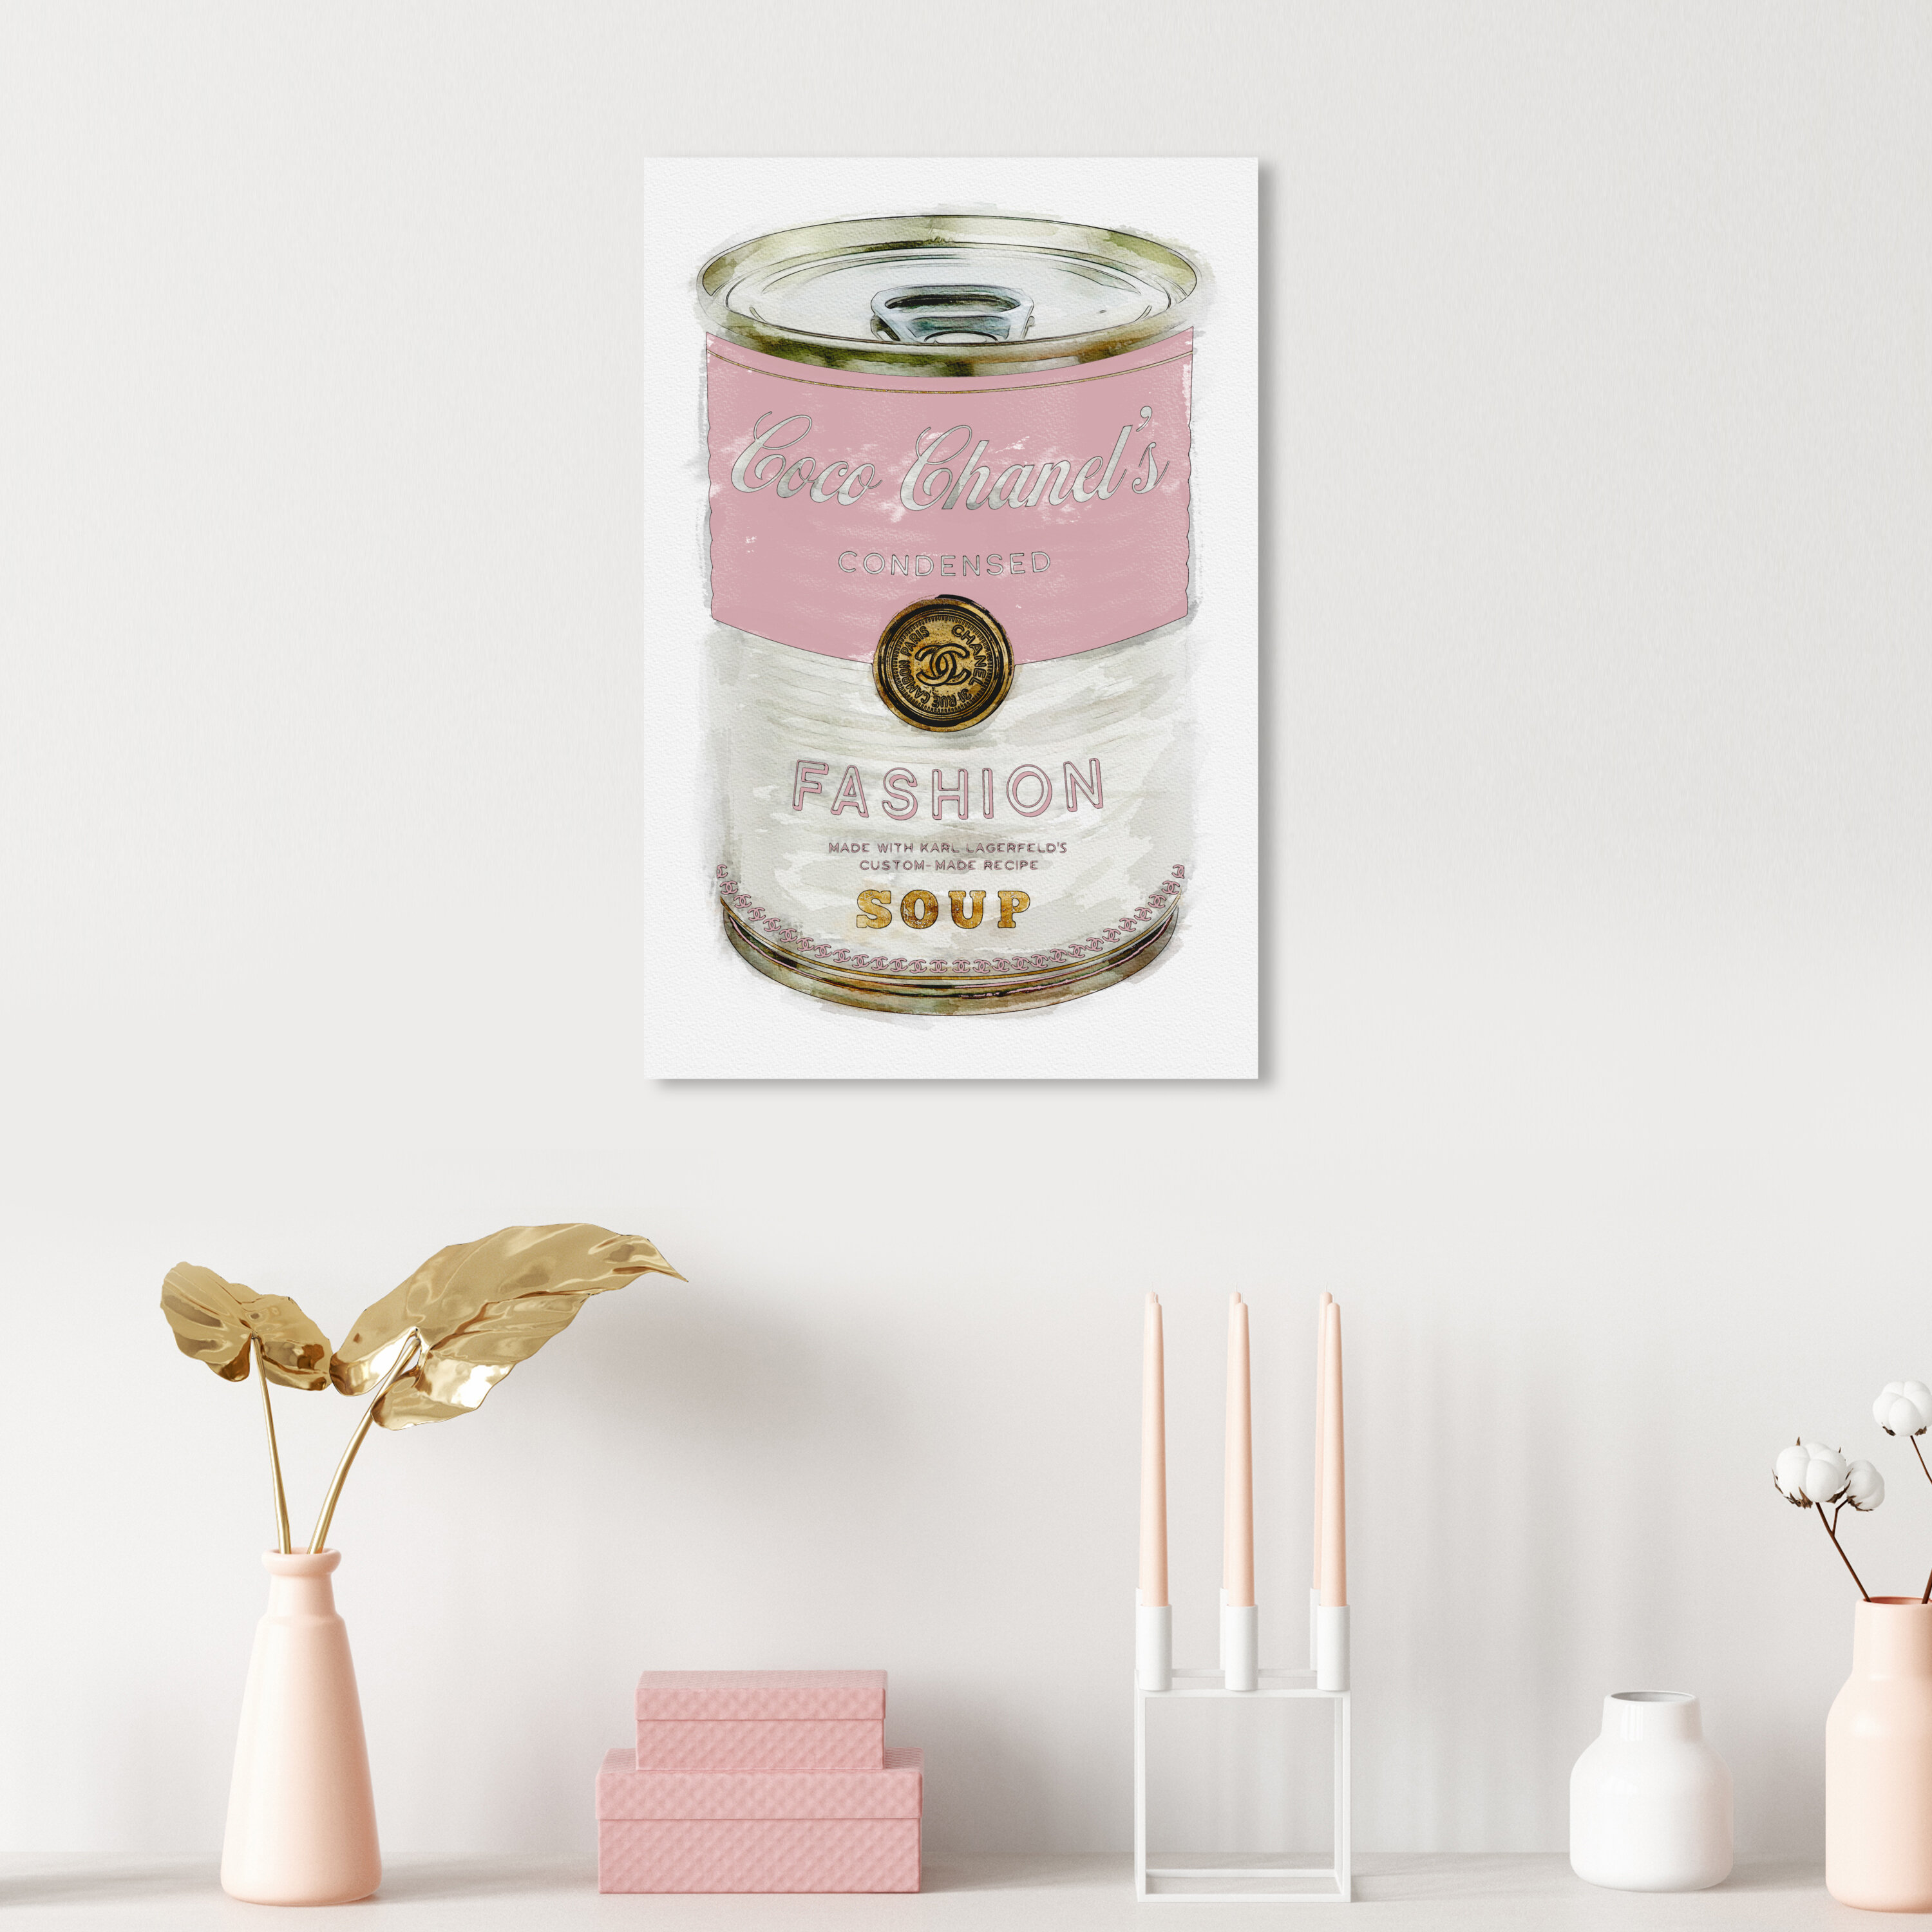 Fashion and Glam Fashion Soup Pink Can by Oliver Gal - Graphic Art Print on Canvas Oliver Gal Size: 15 H x 10 W